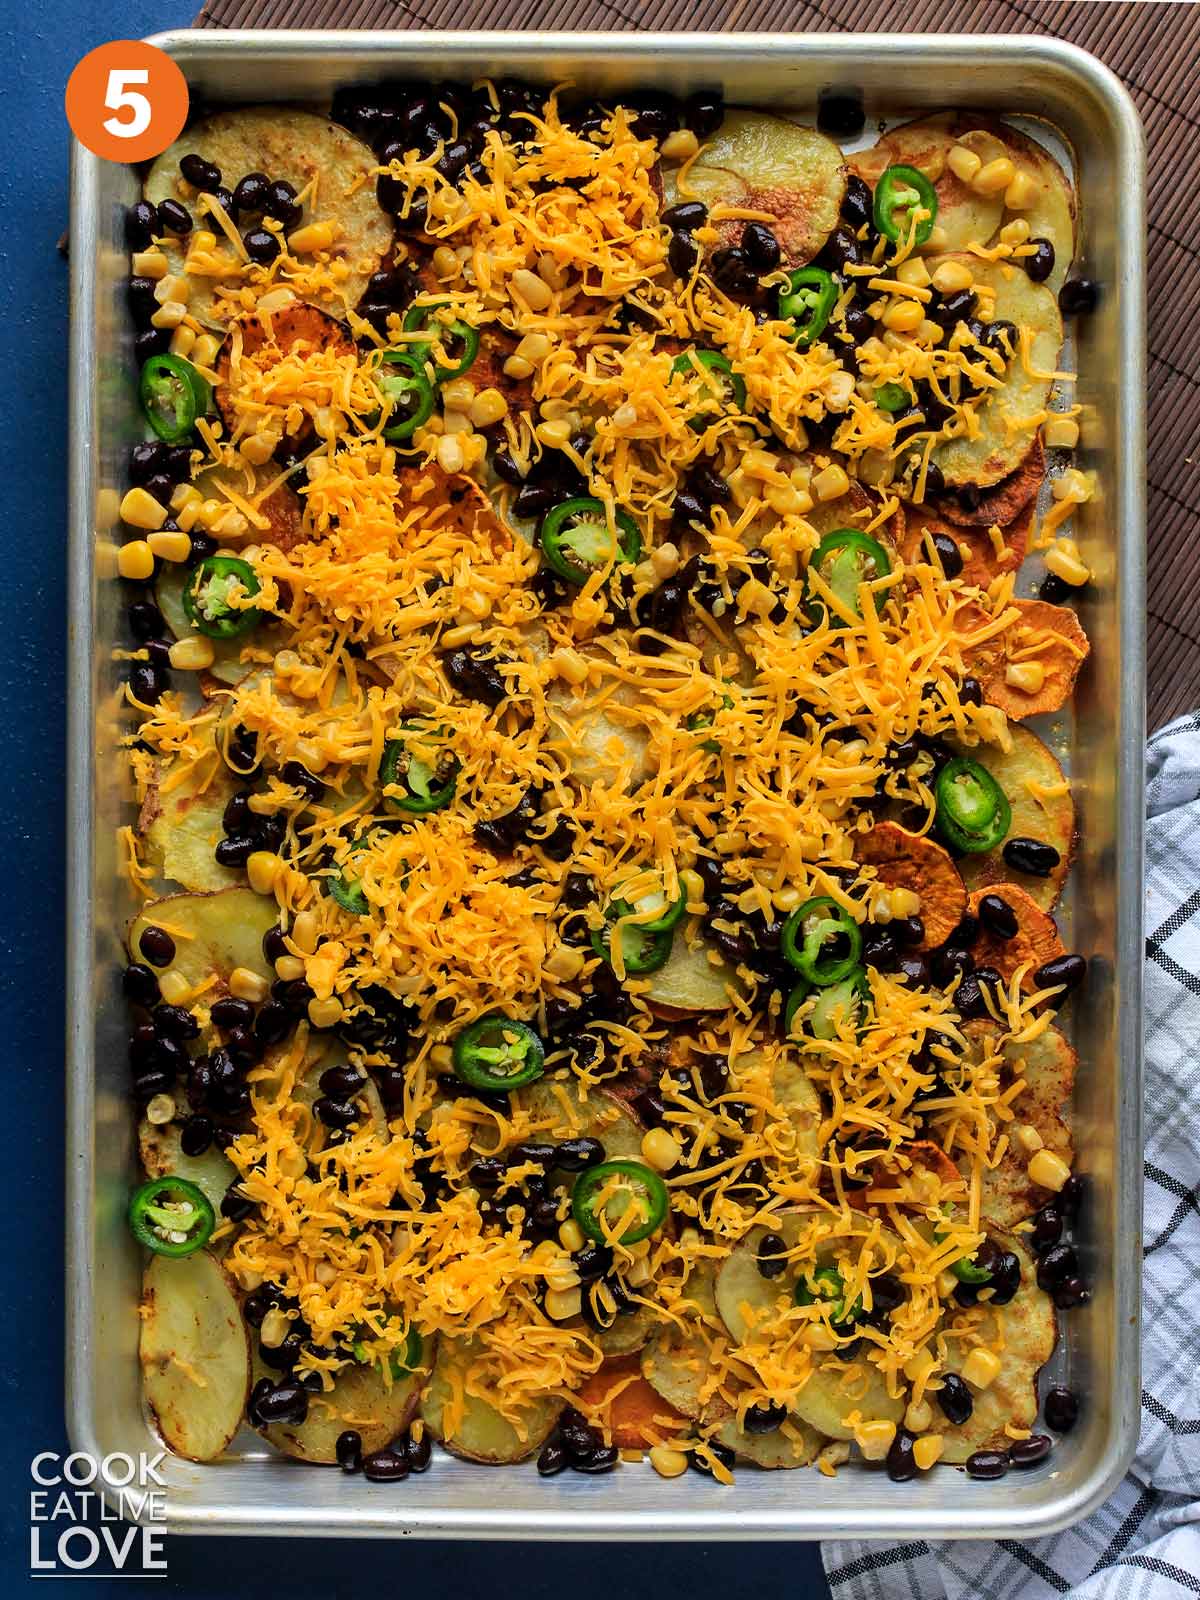 Beans, corn, jalapenos and cheese added to top of nachos.